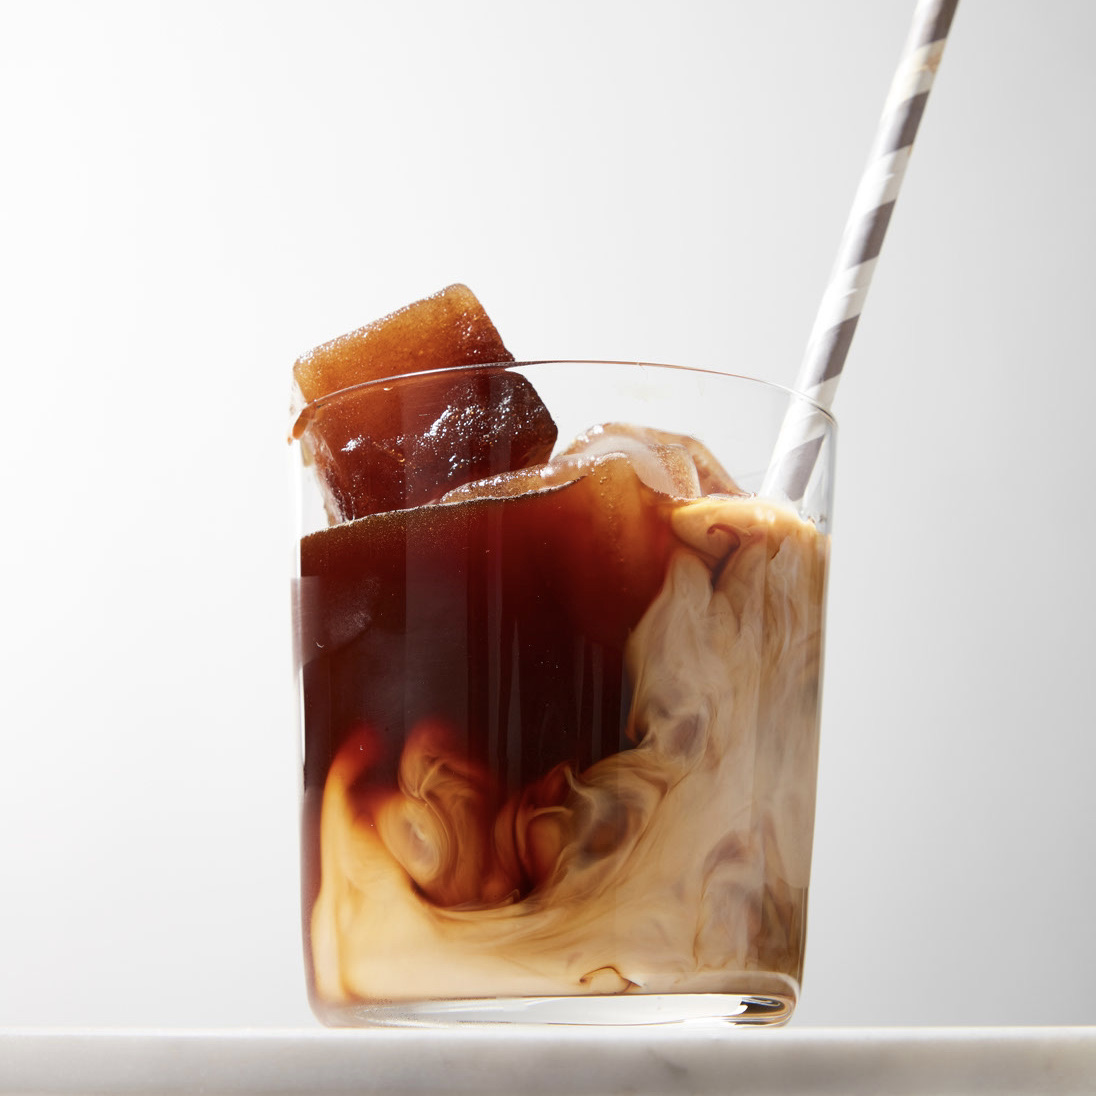 http://blog.williams-sonoma.com/wp-content/uploads/2021/08/Coffee-Ice-Cubes_Side-View-2.jpeg